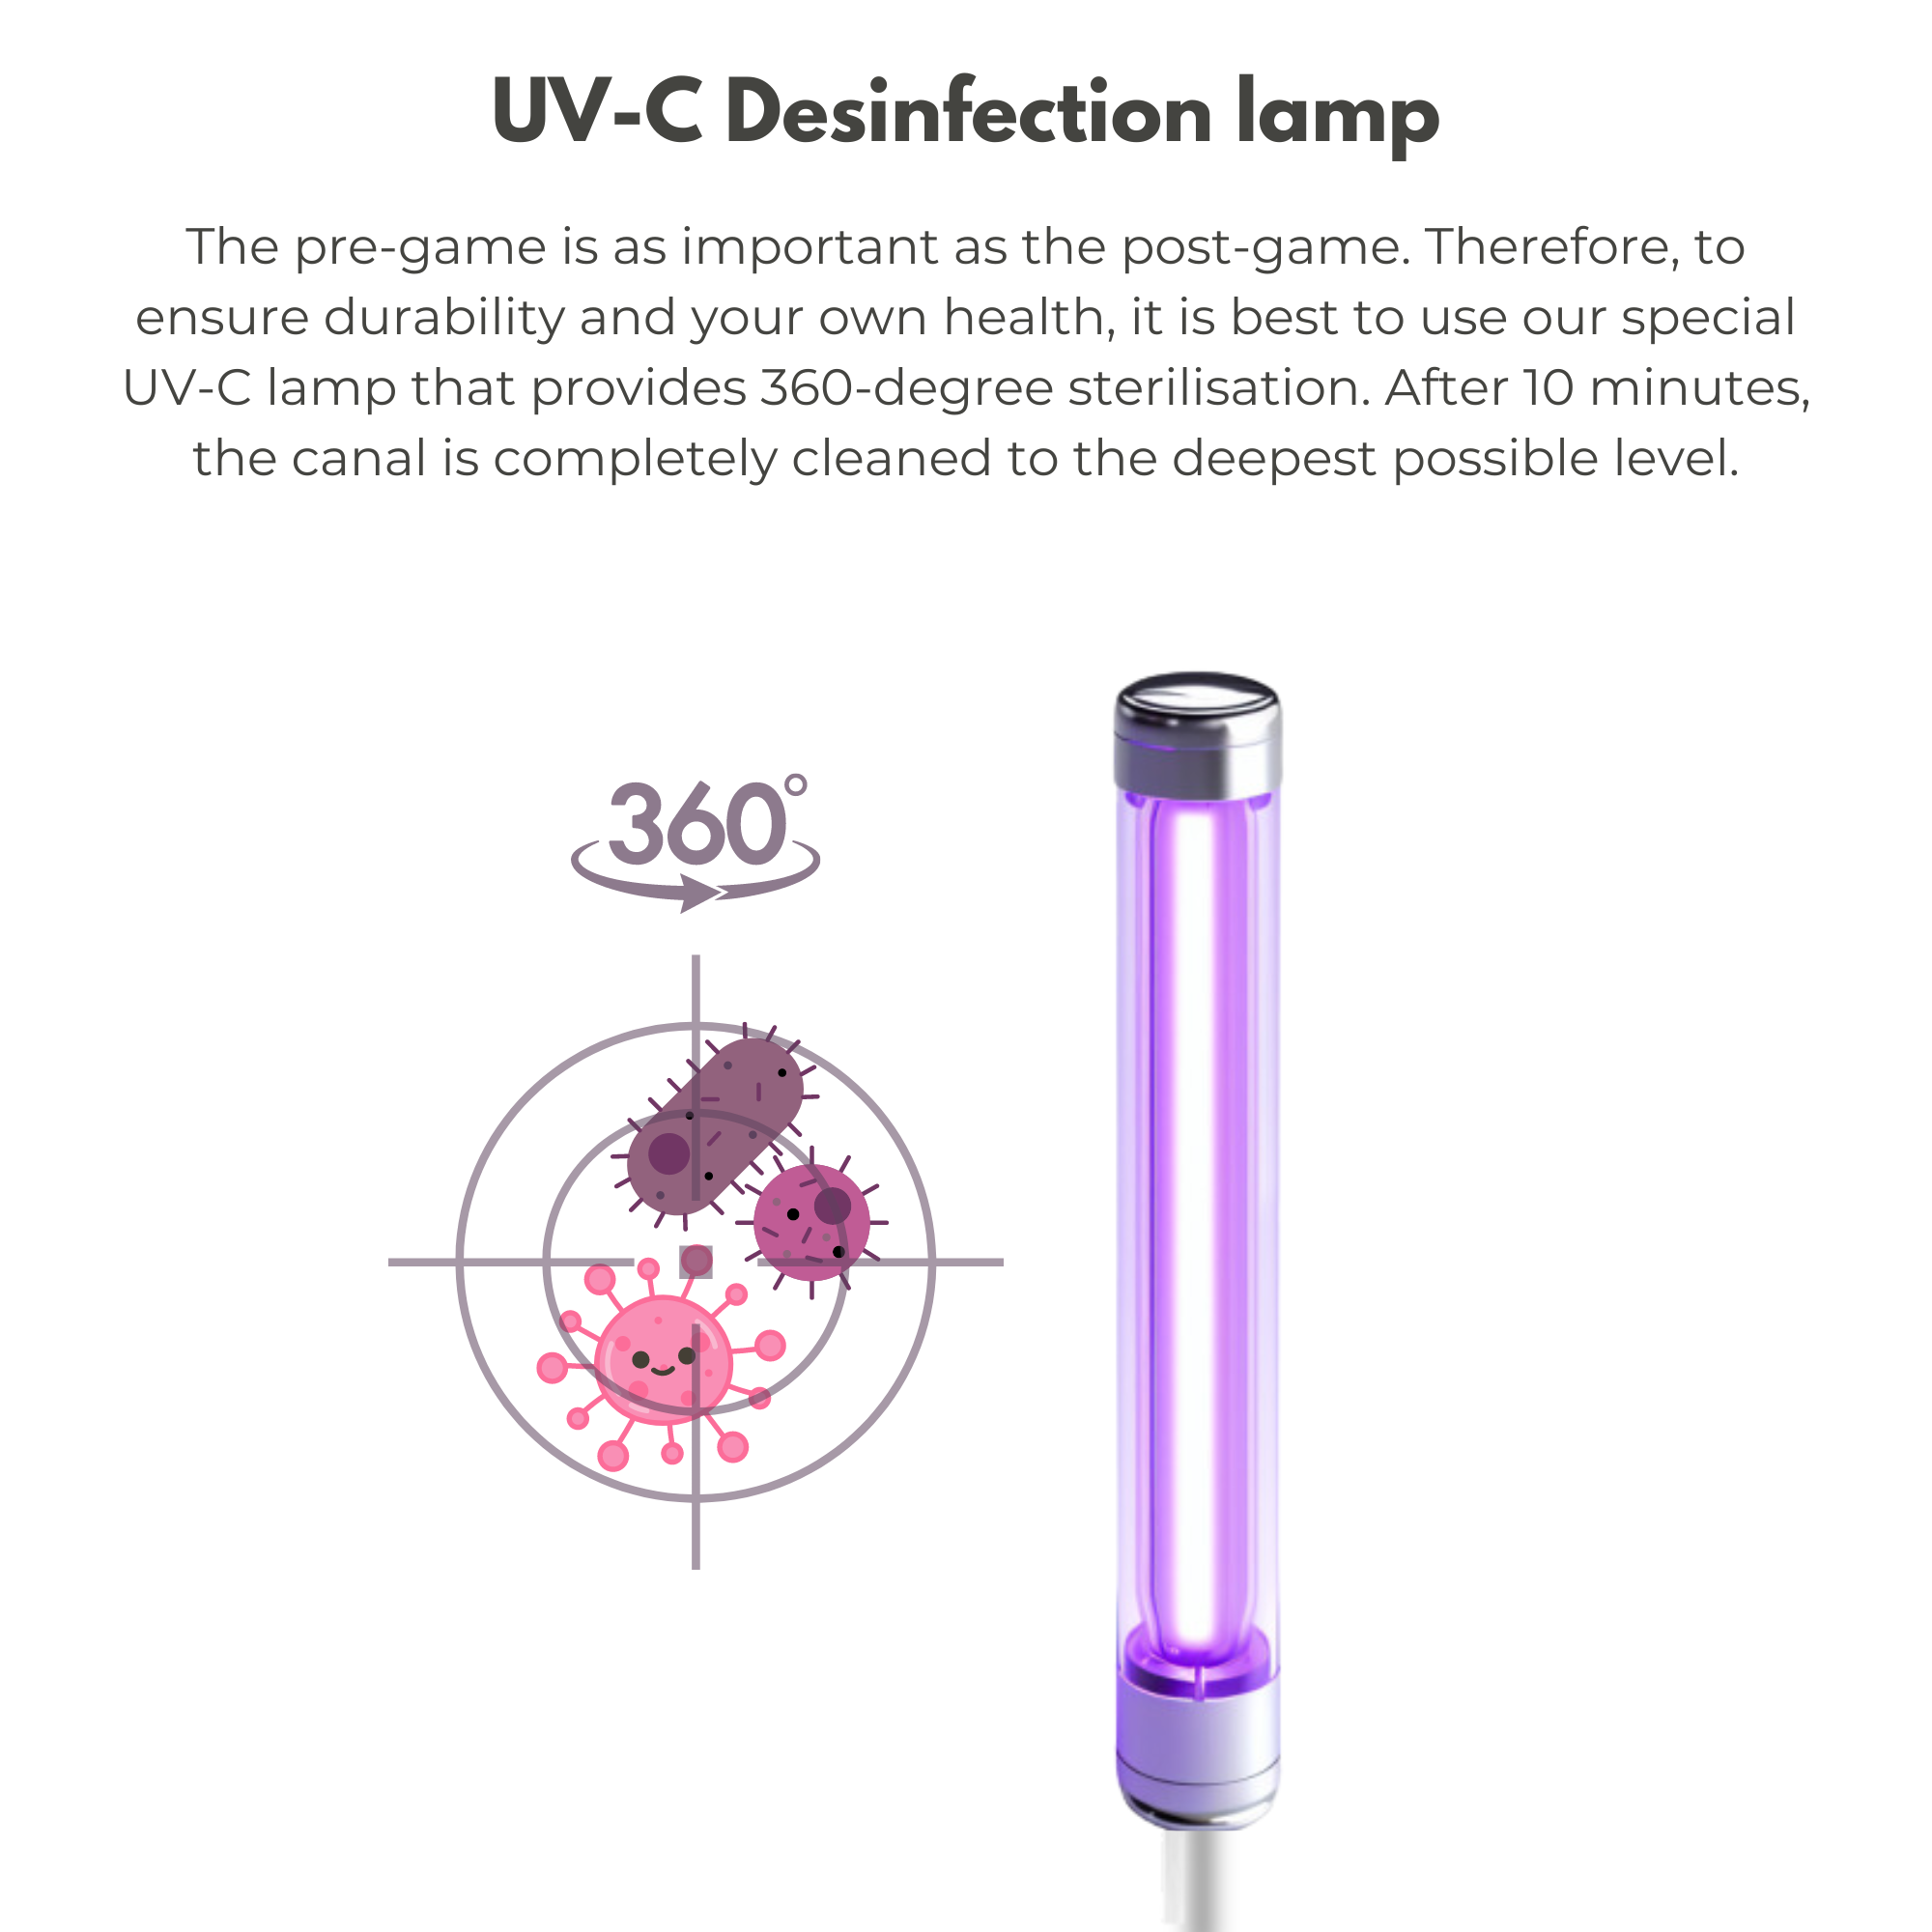 UV-C Desinfection lamp - Monica Moments Germany